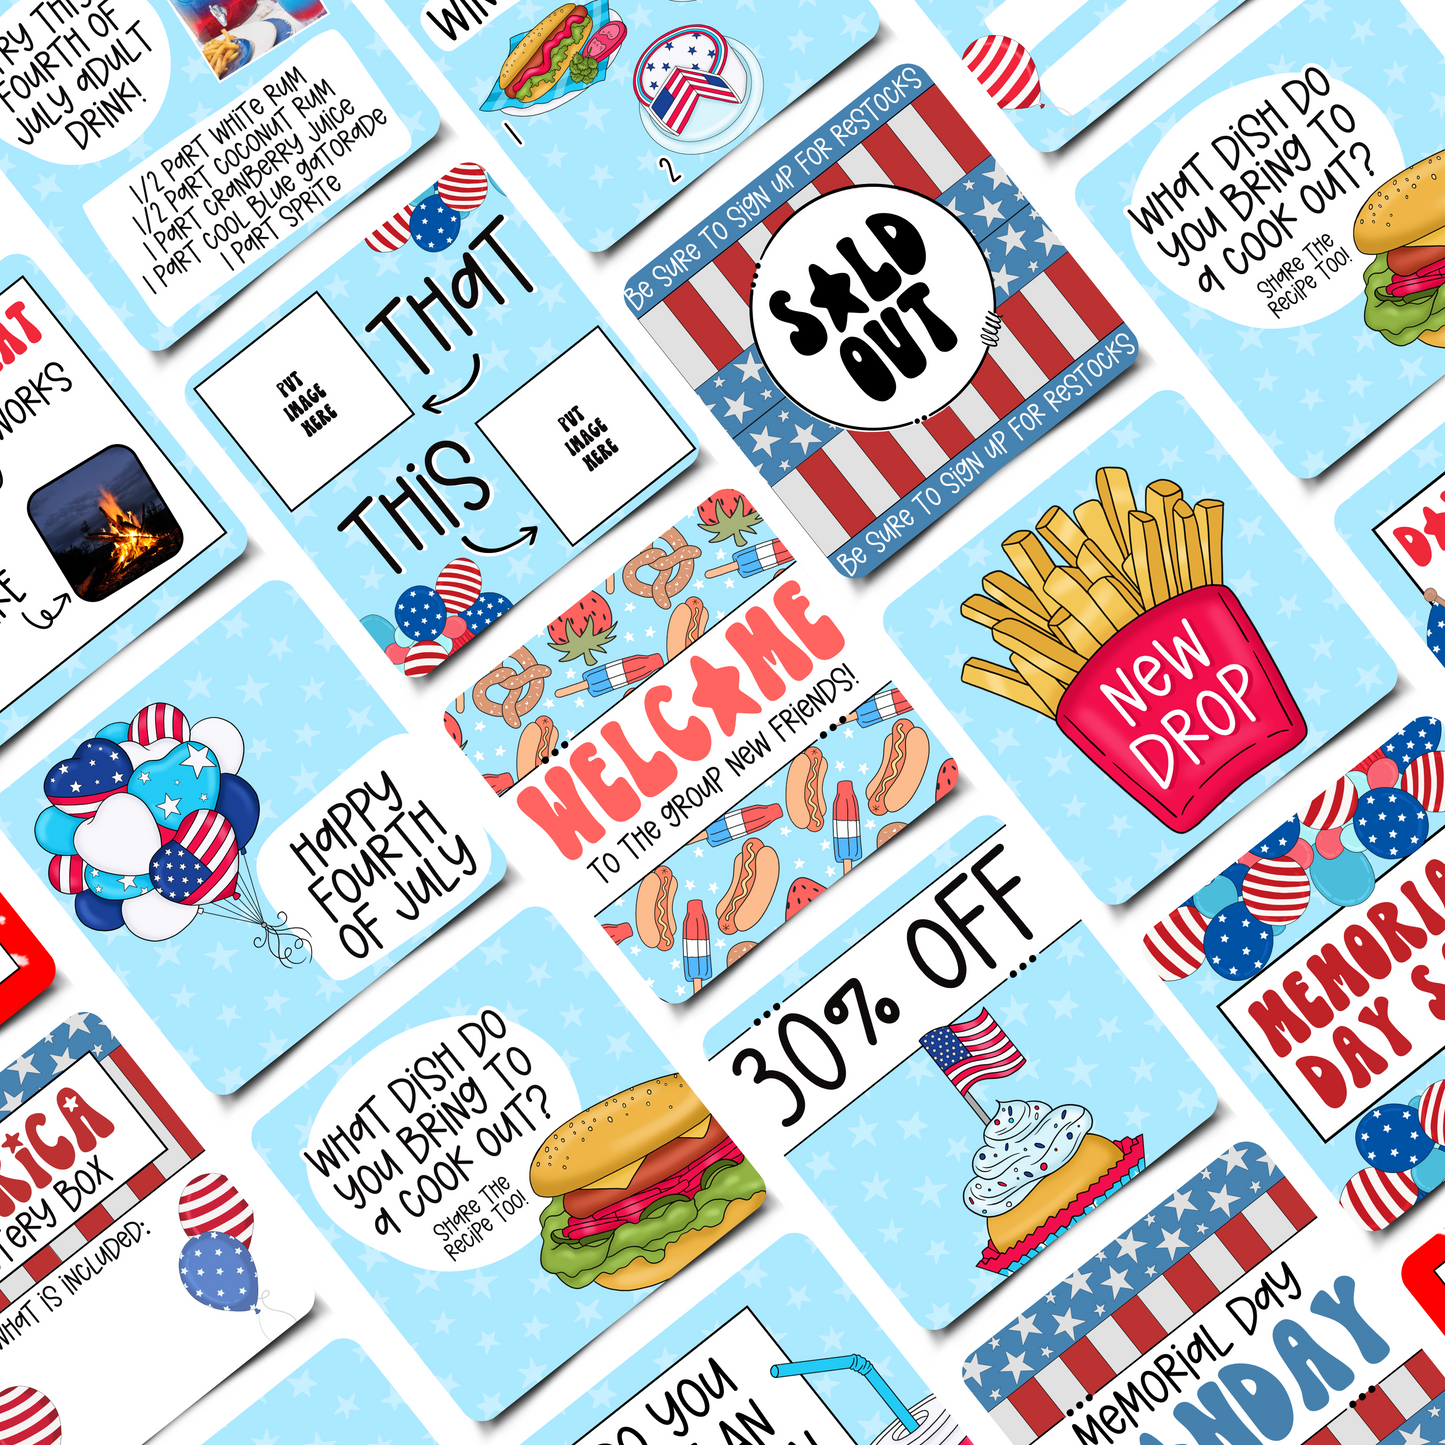 Red, White & Blue Business Engagement & Social Media Content Graphics Collection